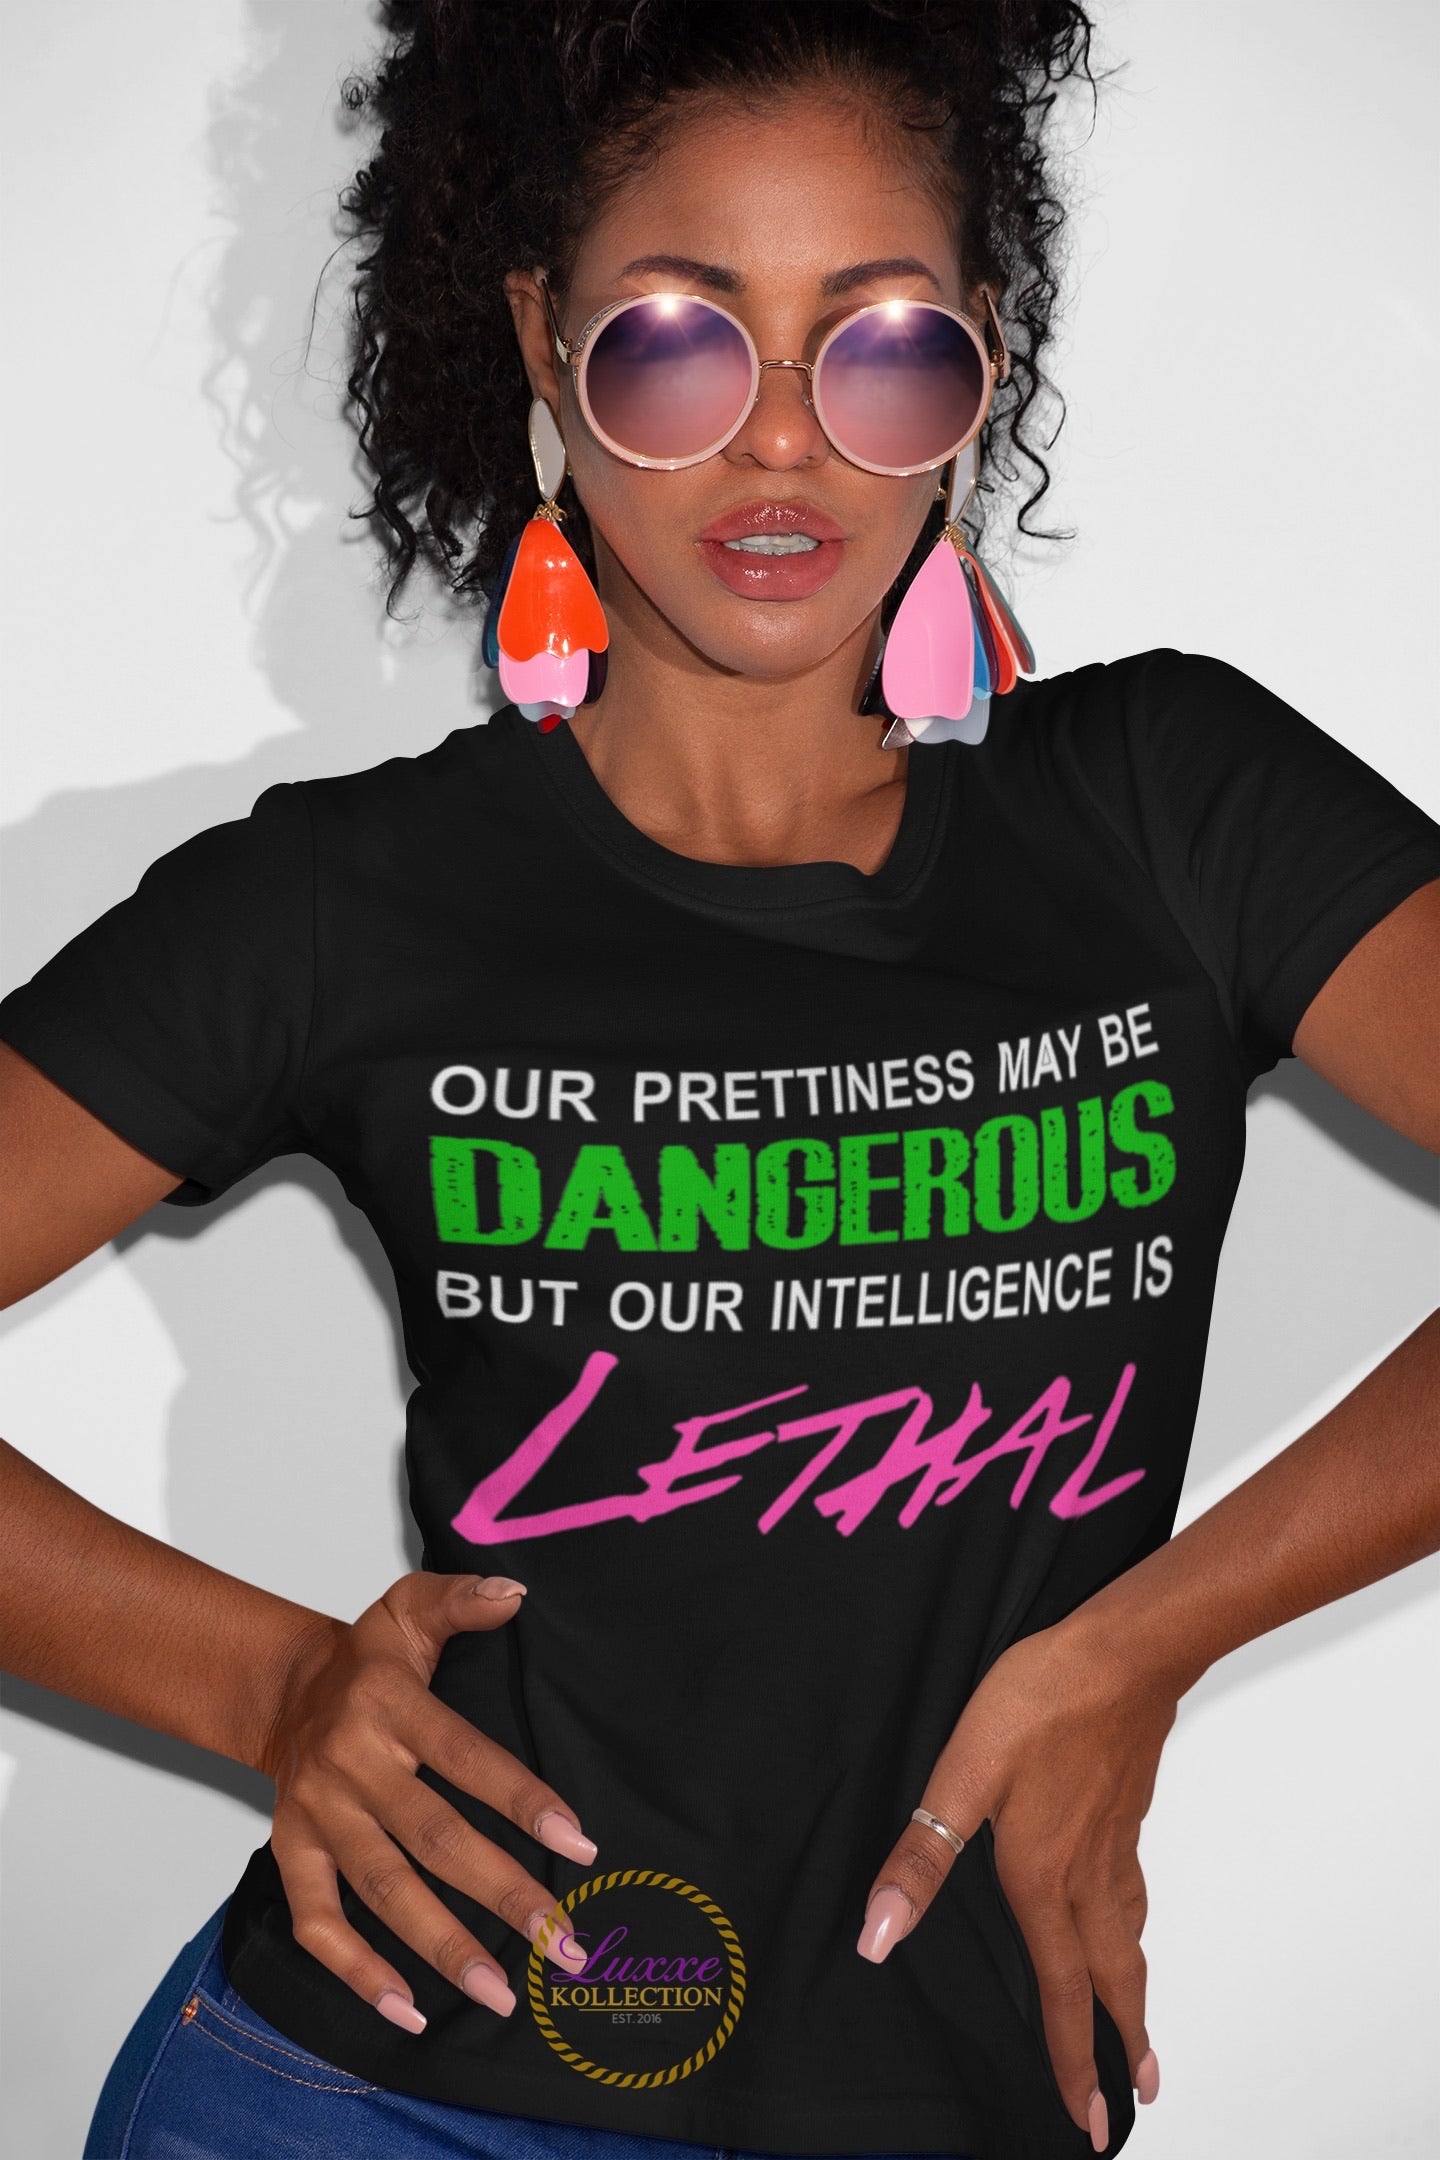 Our Prettiness May Be Dangerous But Our Intelligence Is Lethal AKA T-shirt